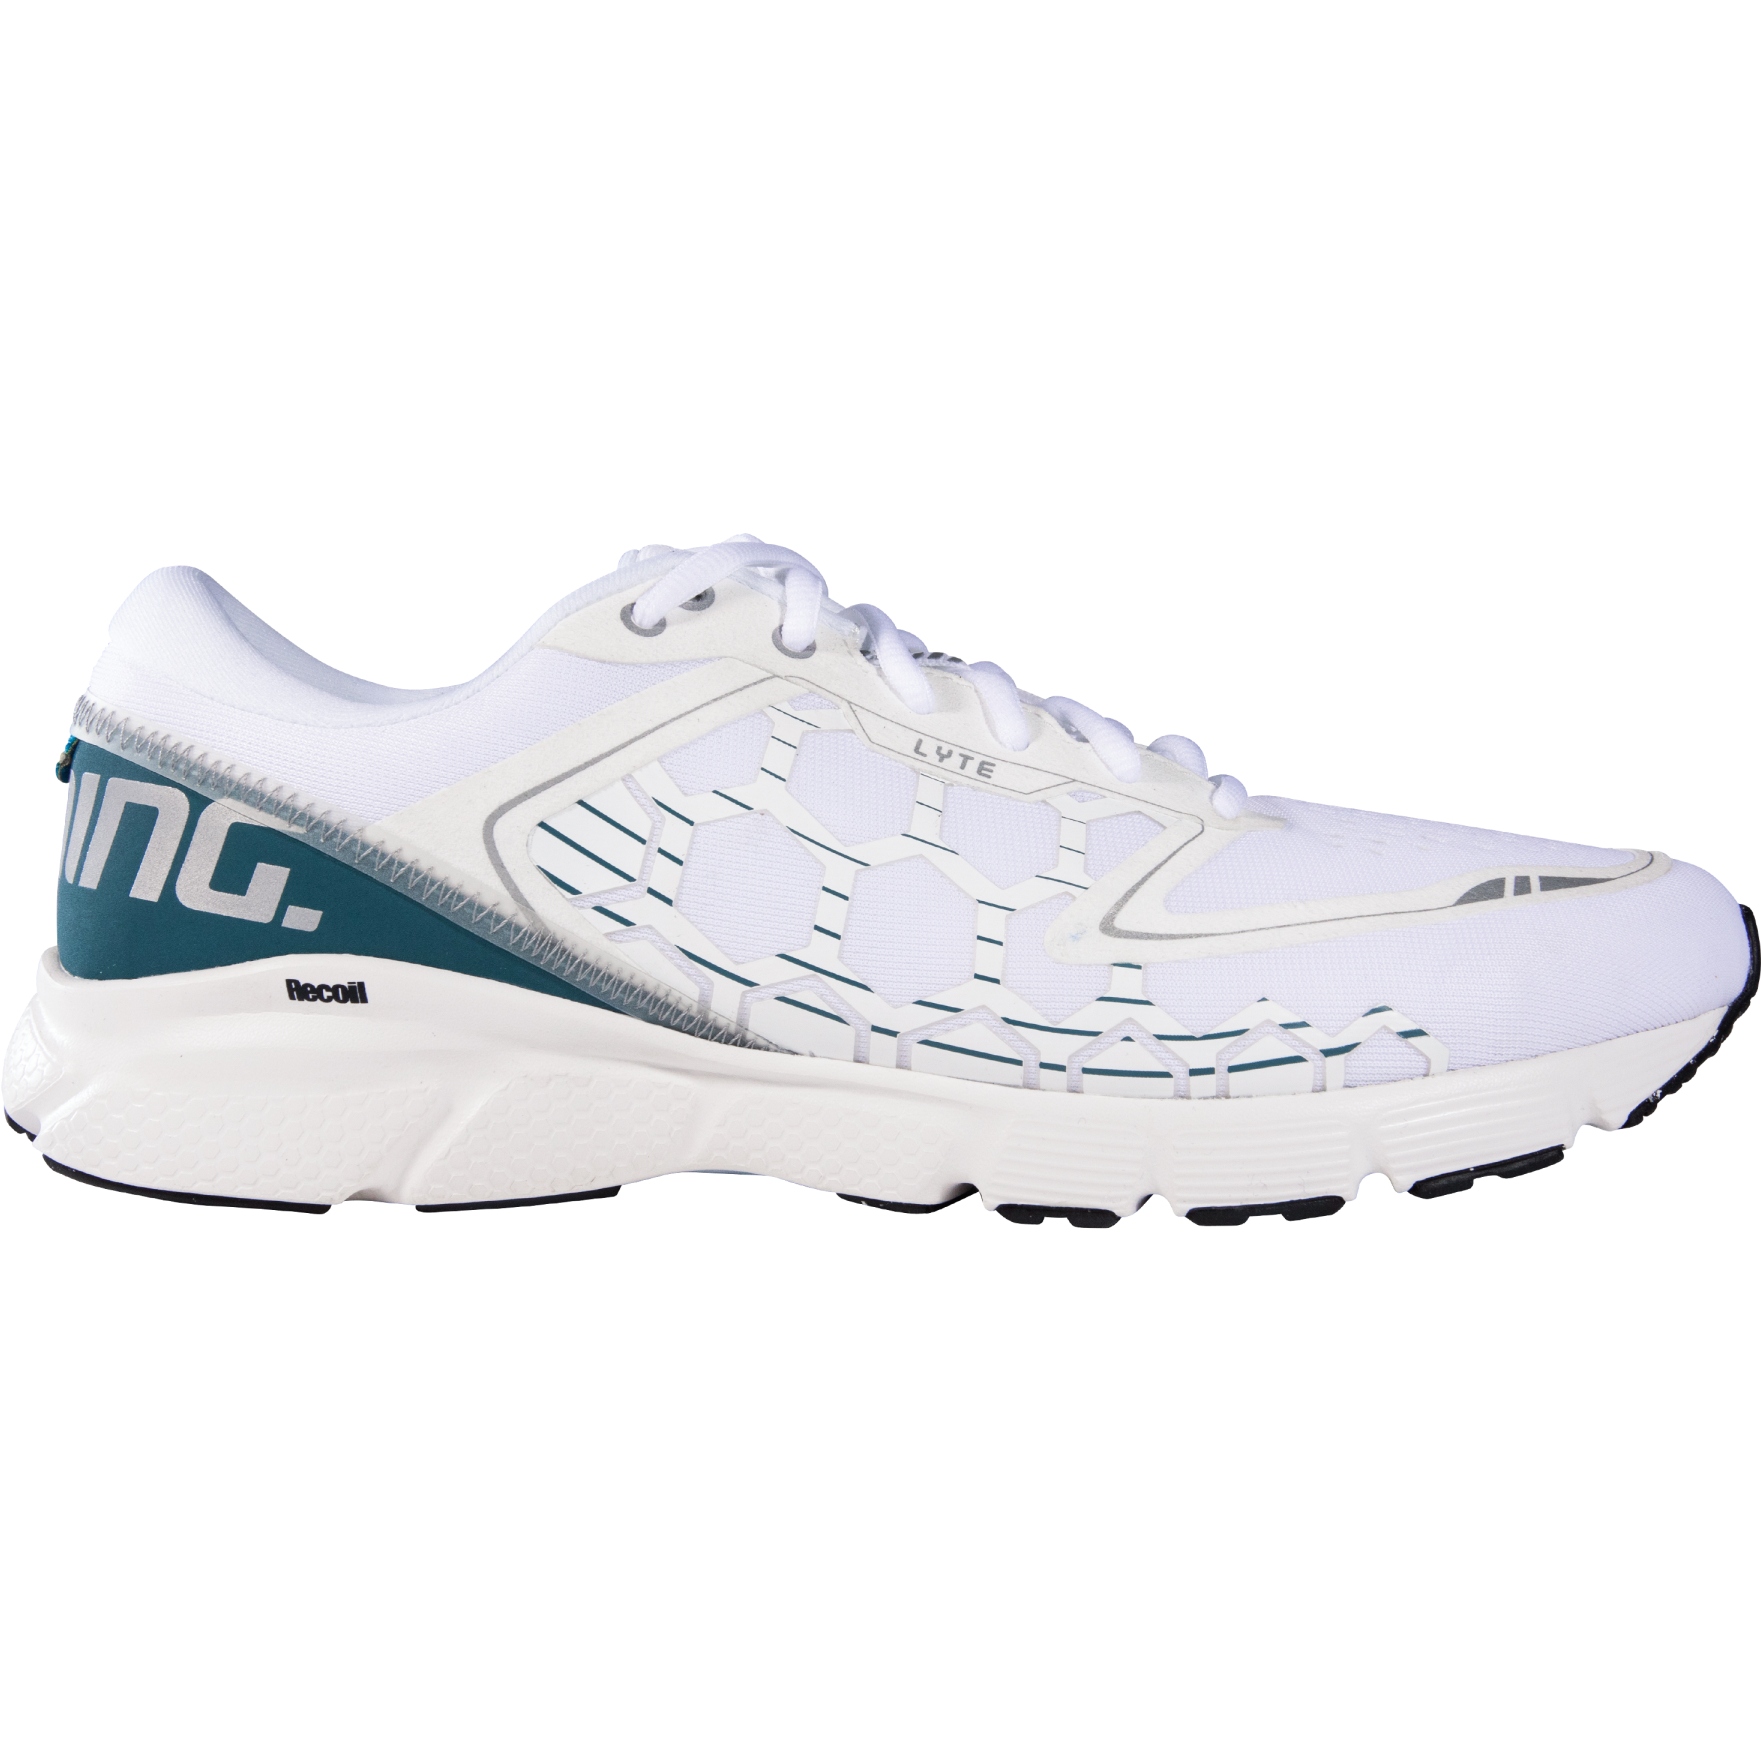 Image of Salming Recoil Lyte Shoes Men - blue/white